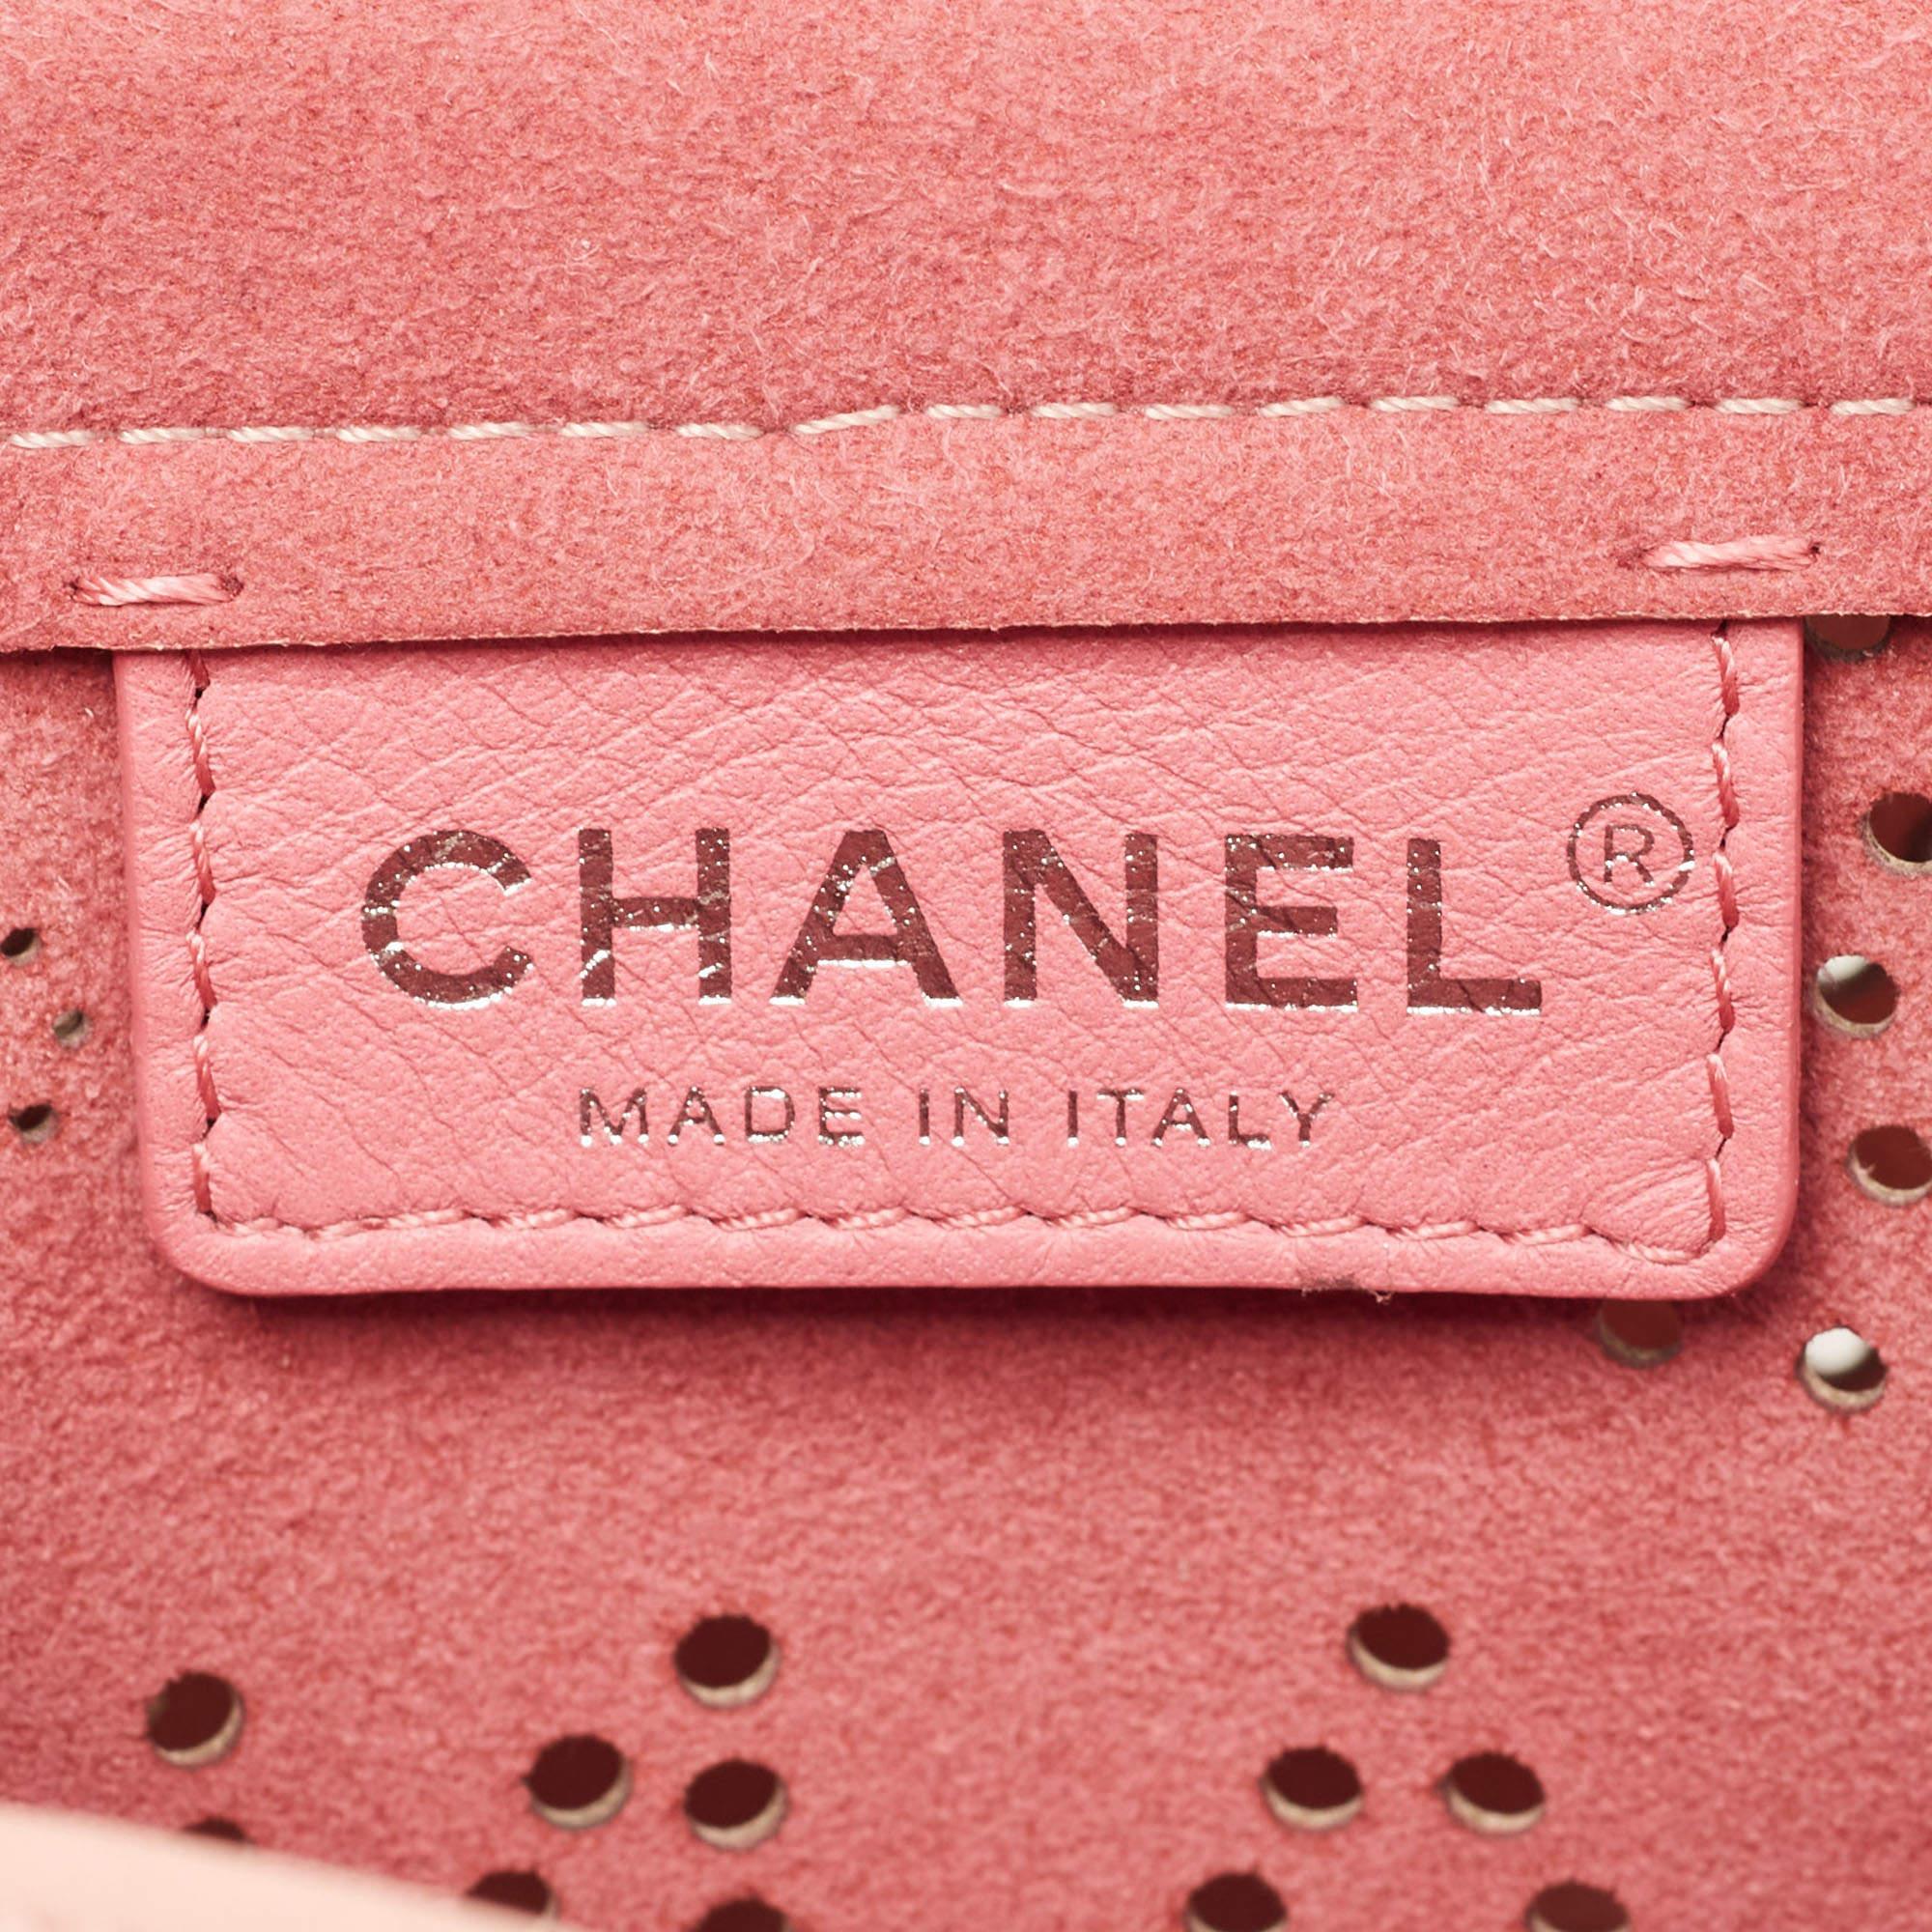 Chanel Pink Leather Eyelet Waist Bag For Sale 8